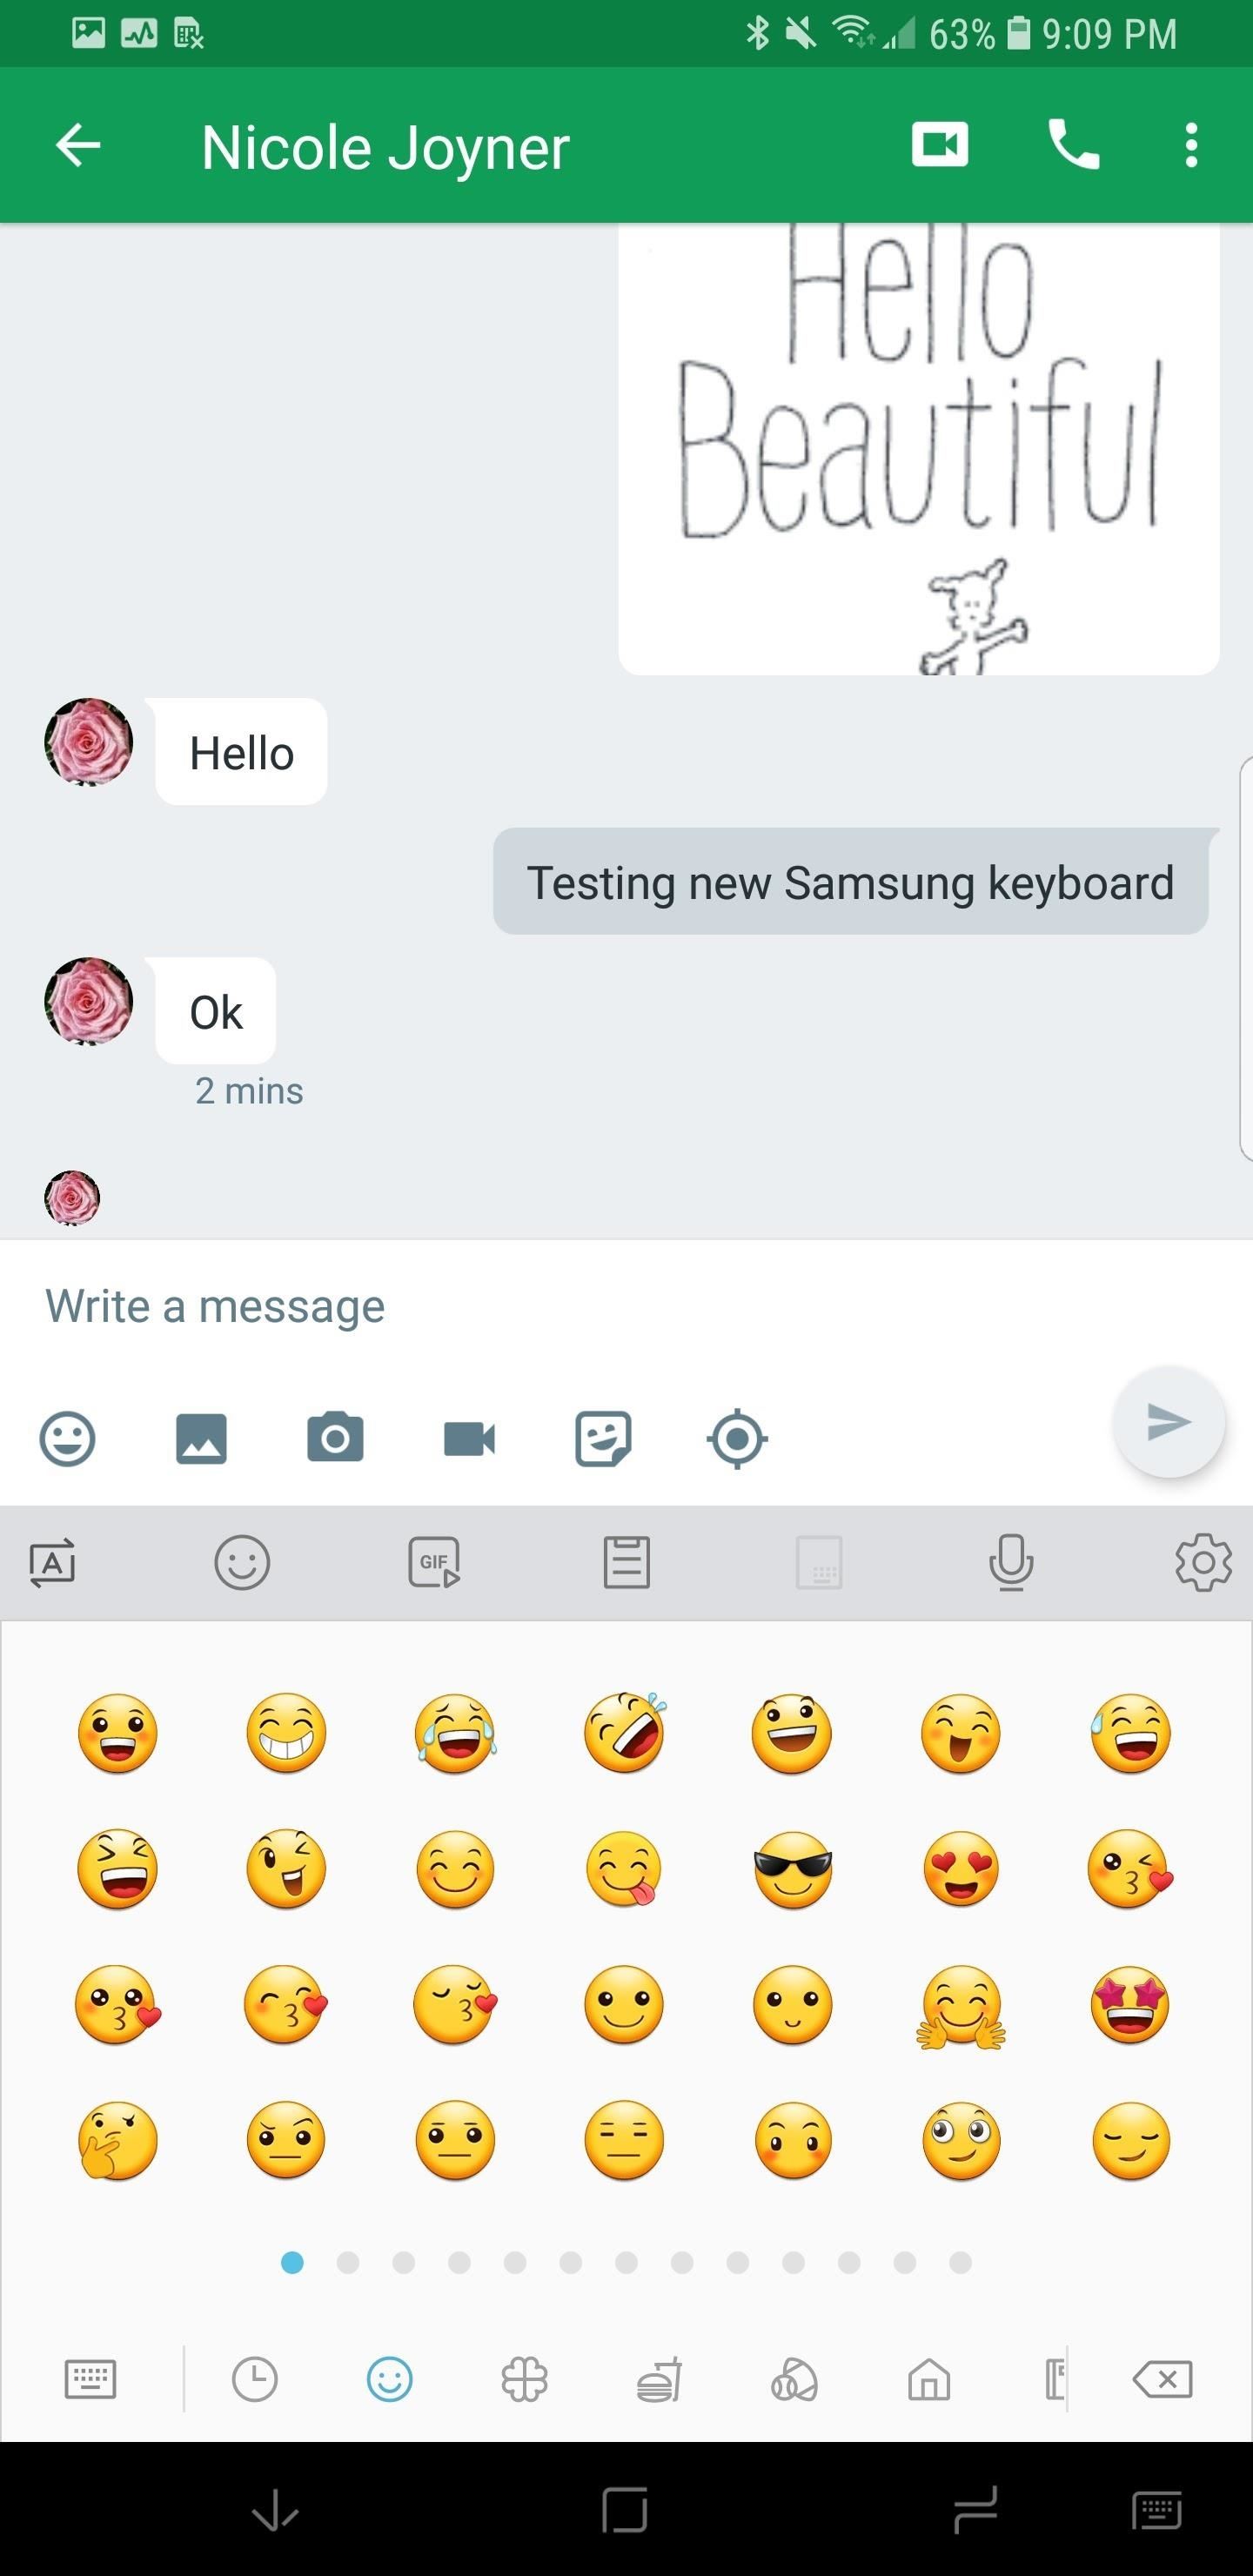 Galaxy S8 Oreo Update: Samsung Keyboard Gets an Overhaul in Android 8.0